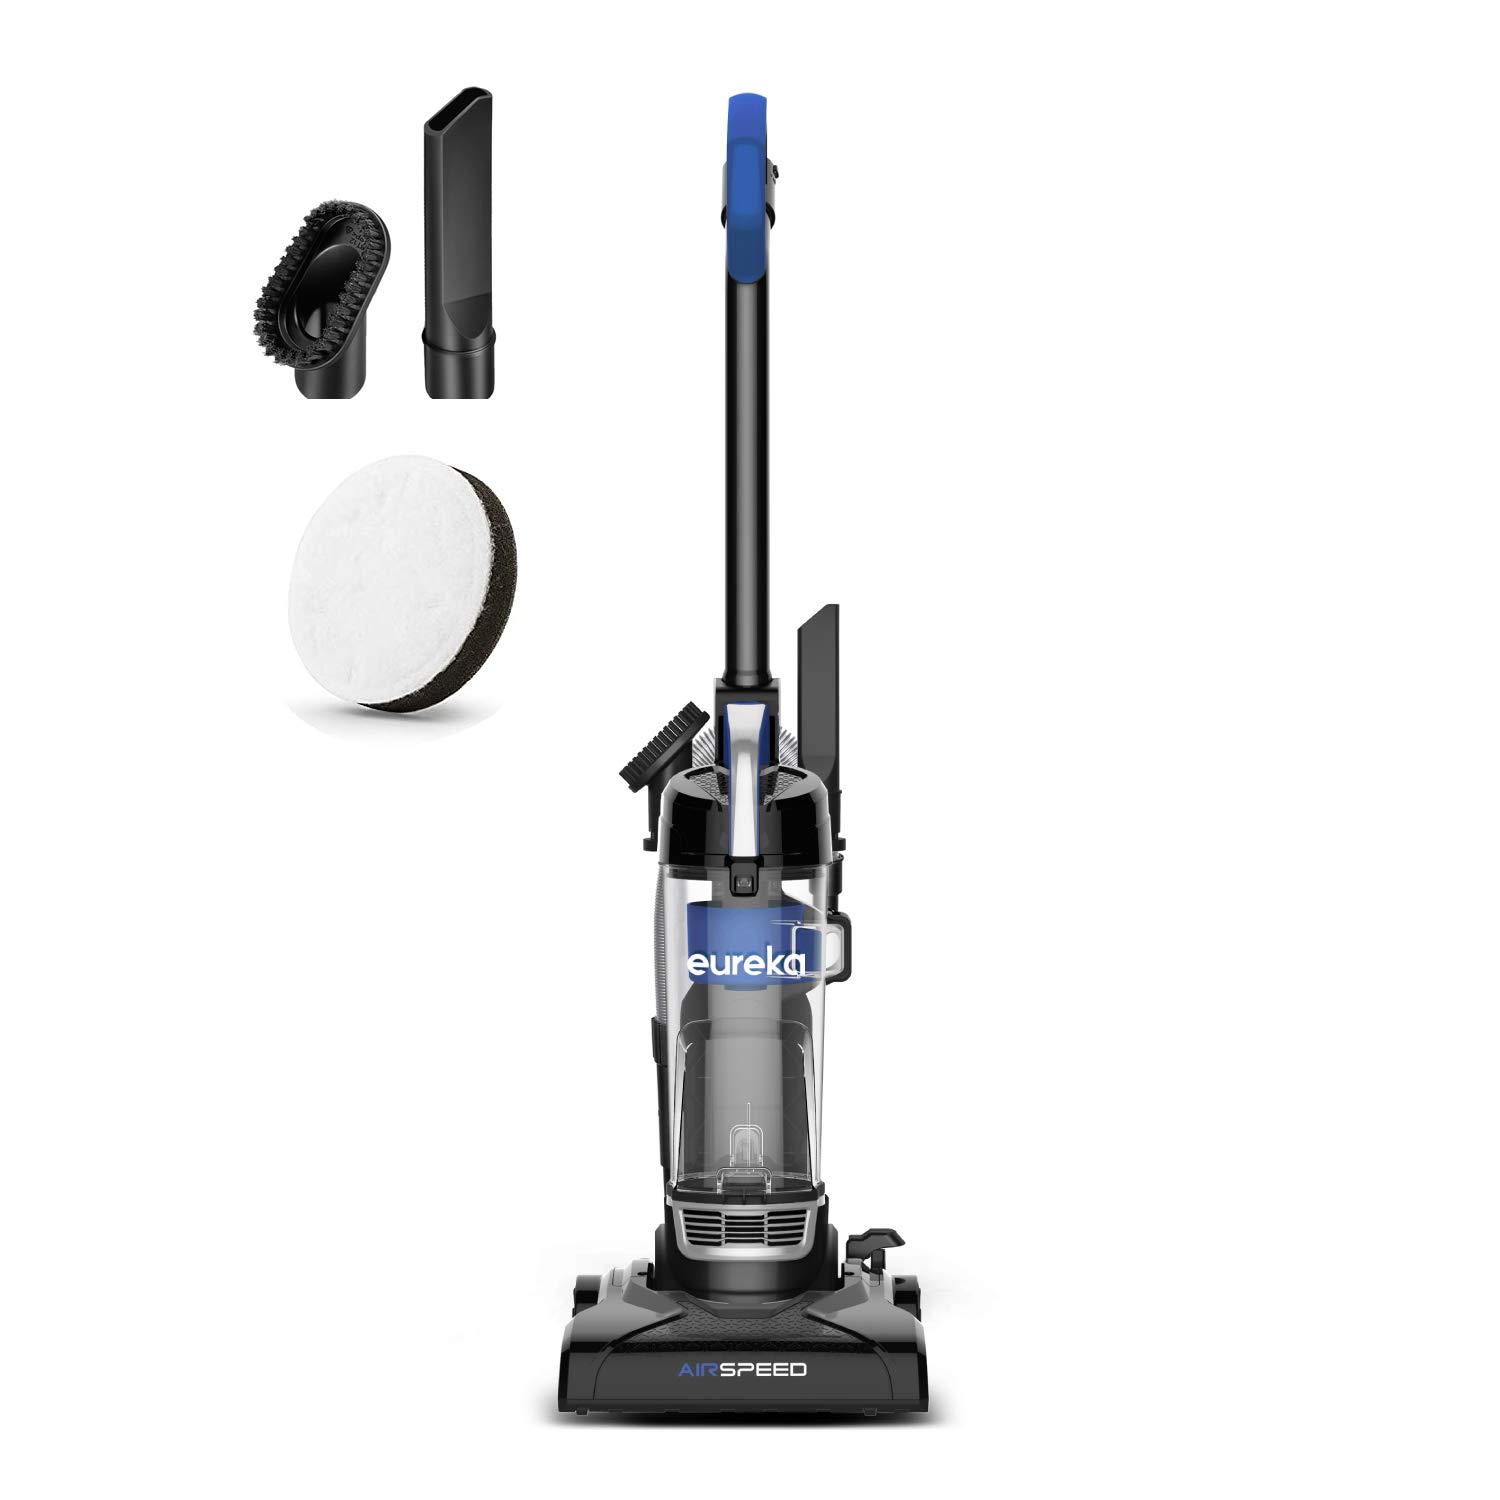 Eureka Airspeed Ultra-Lightweight Compact Bagless Upright Vacuum Cleaner with Replacement Filter